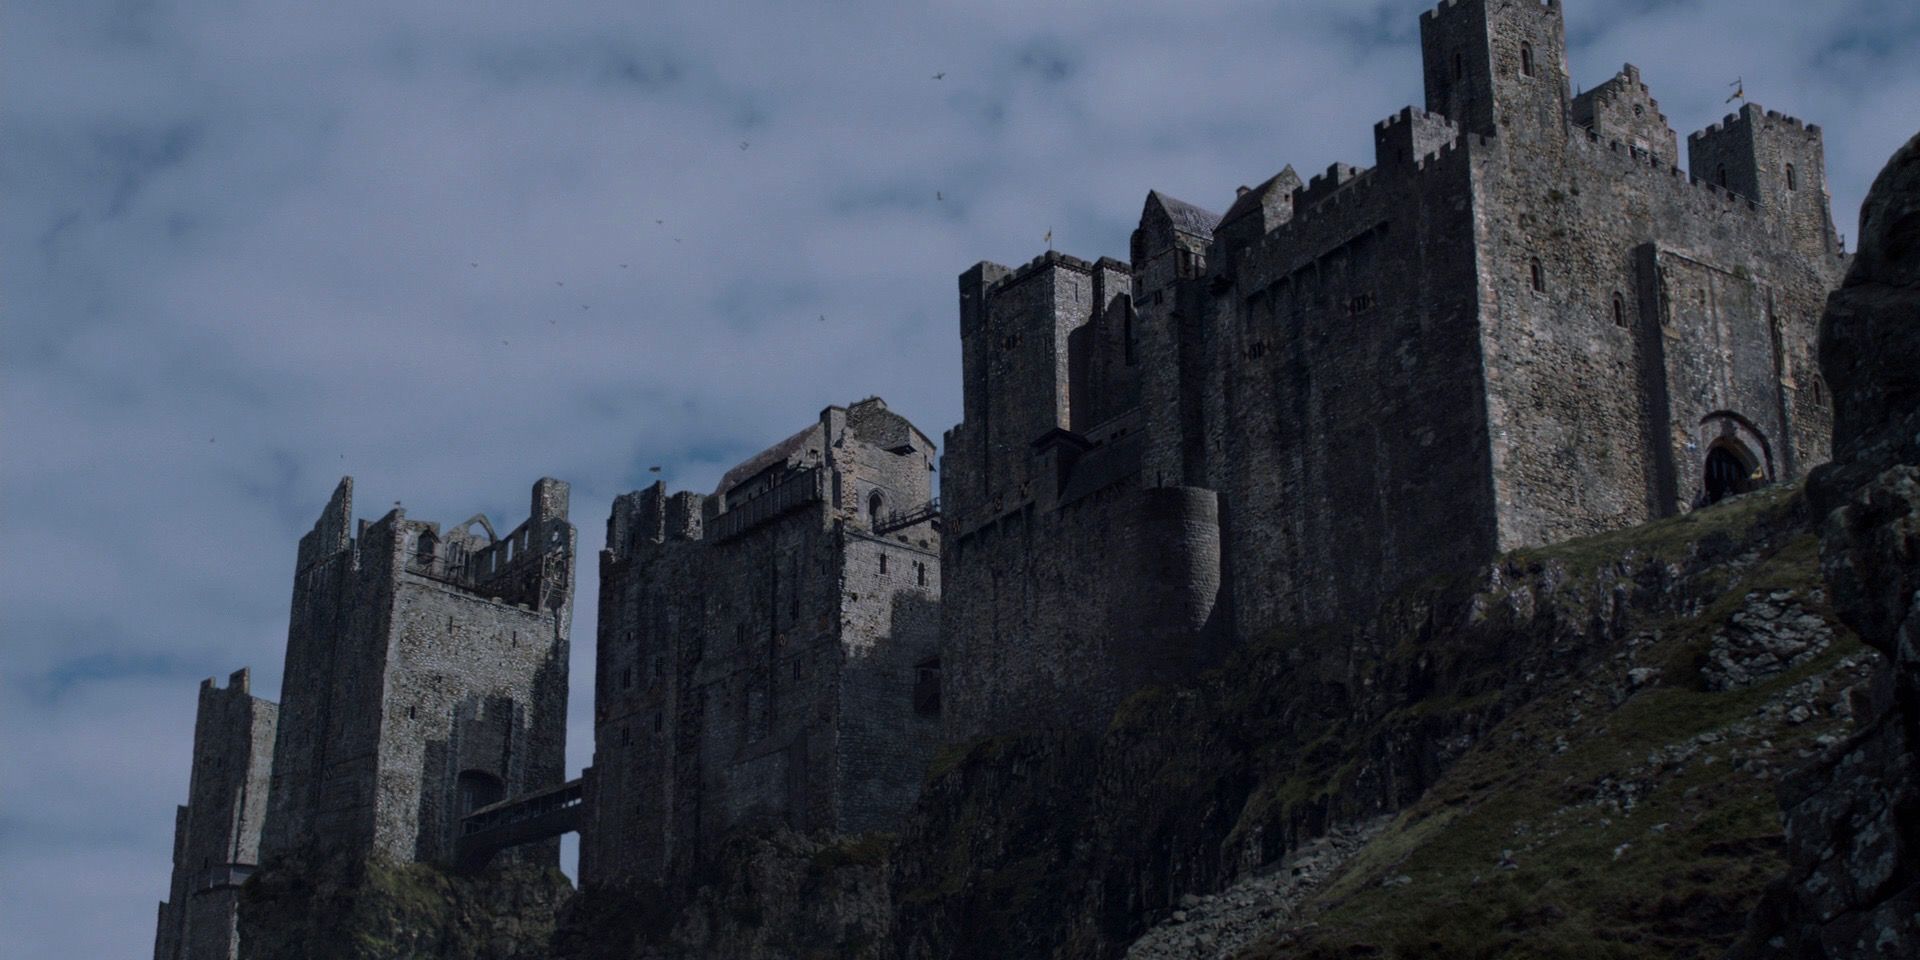 Pyke castle in Game of Thrones